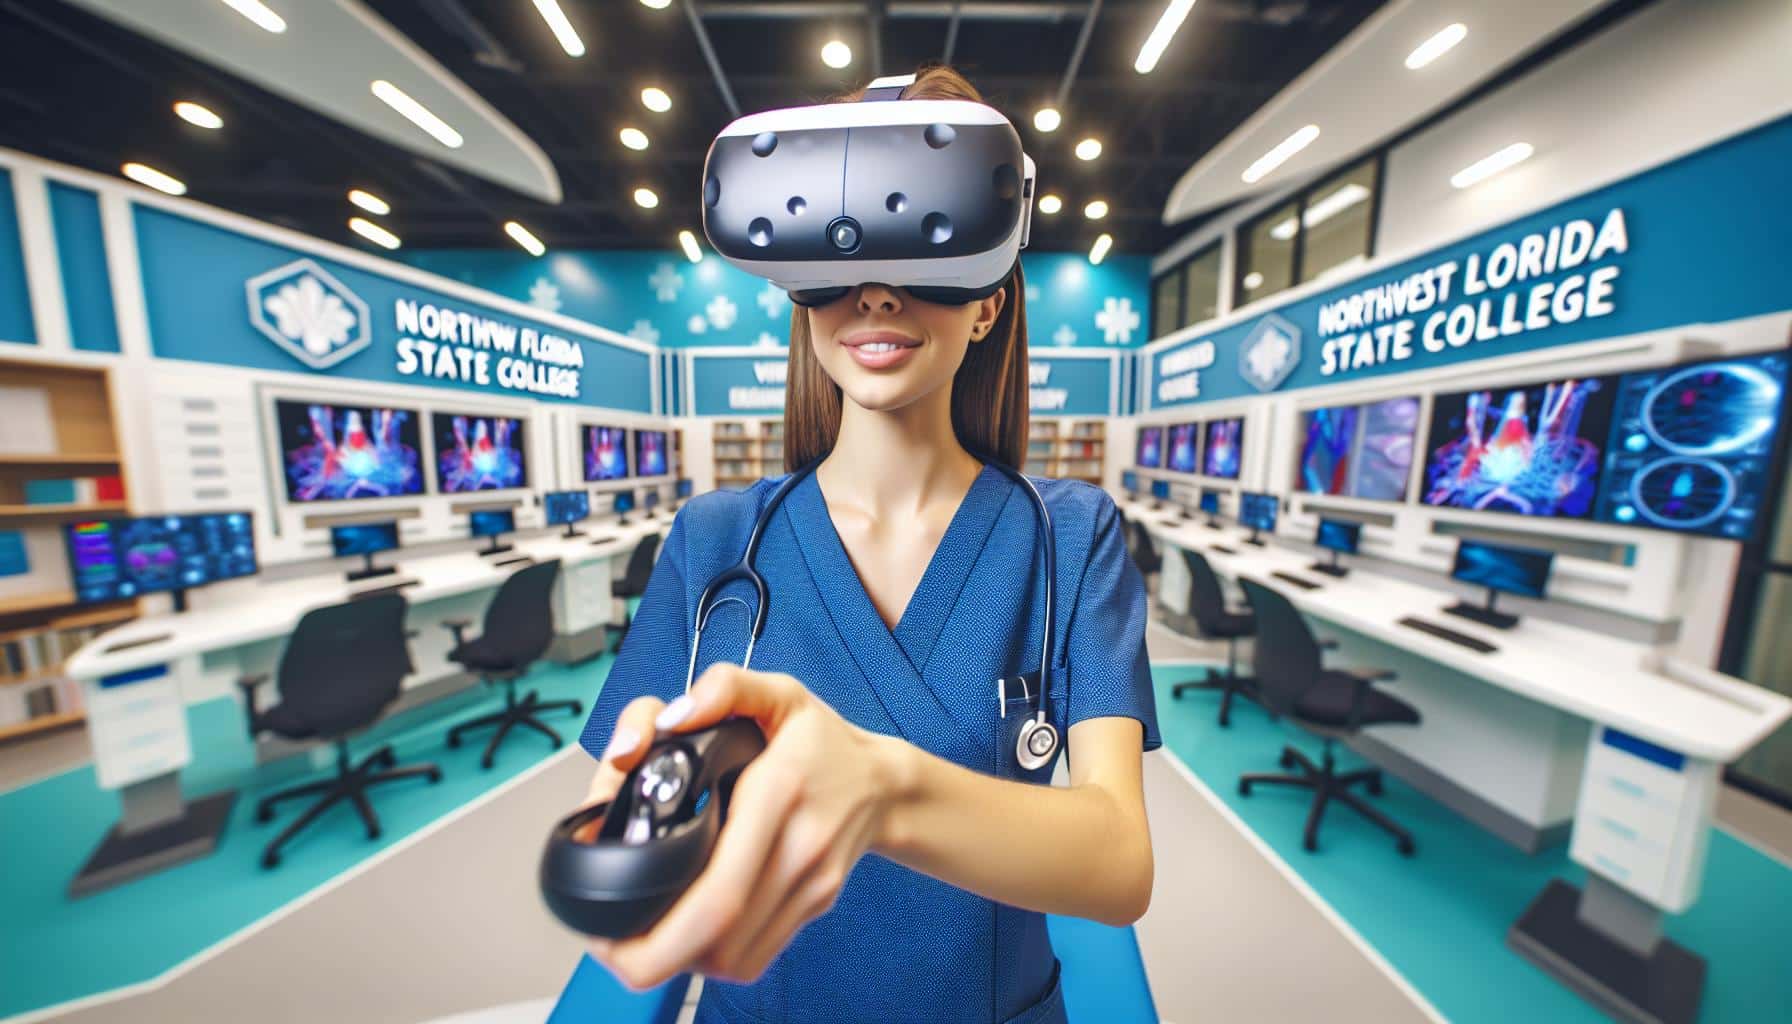 Northwest Florida State College Introduces Virtual Reality Training for Nursing Students | FinOracle